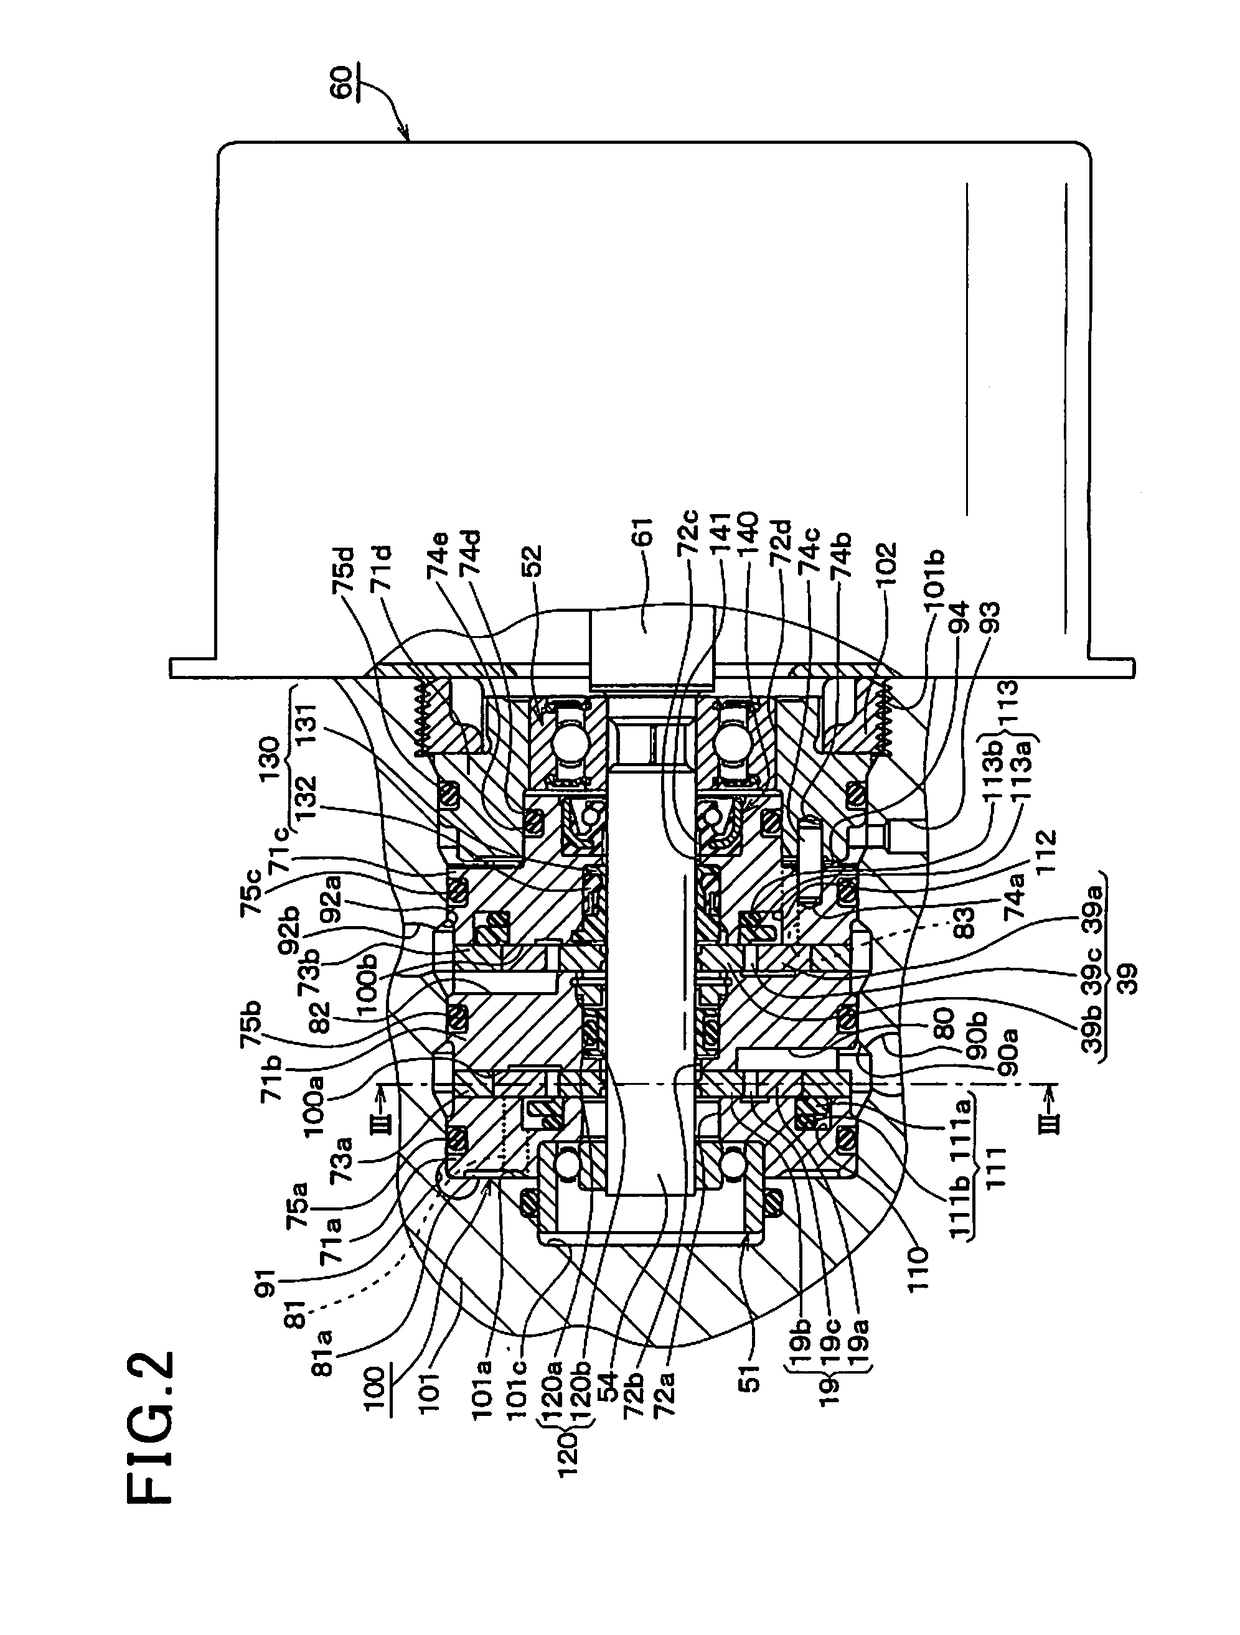 Rotating pumping apparatus with seal mechanism